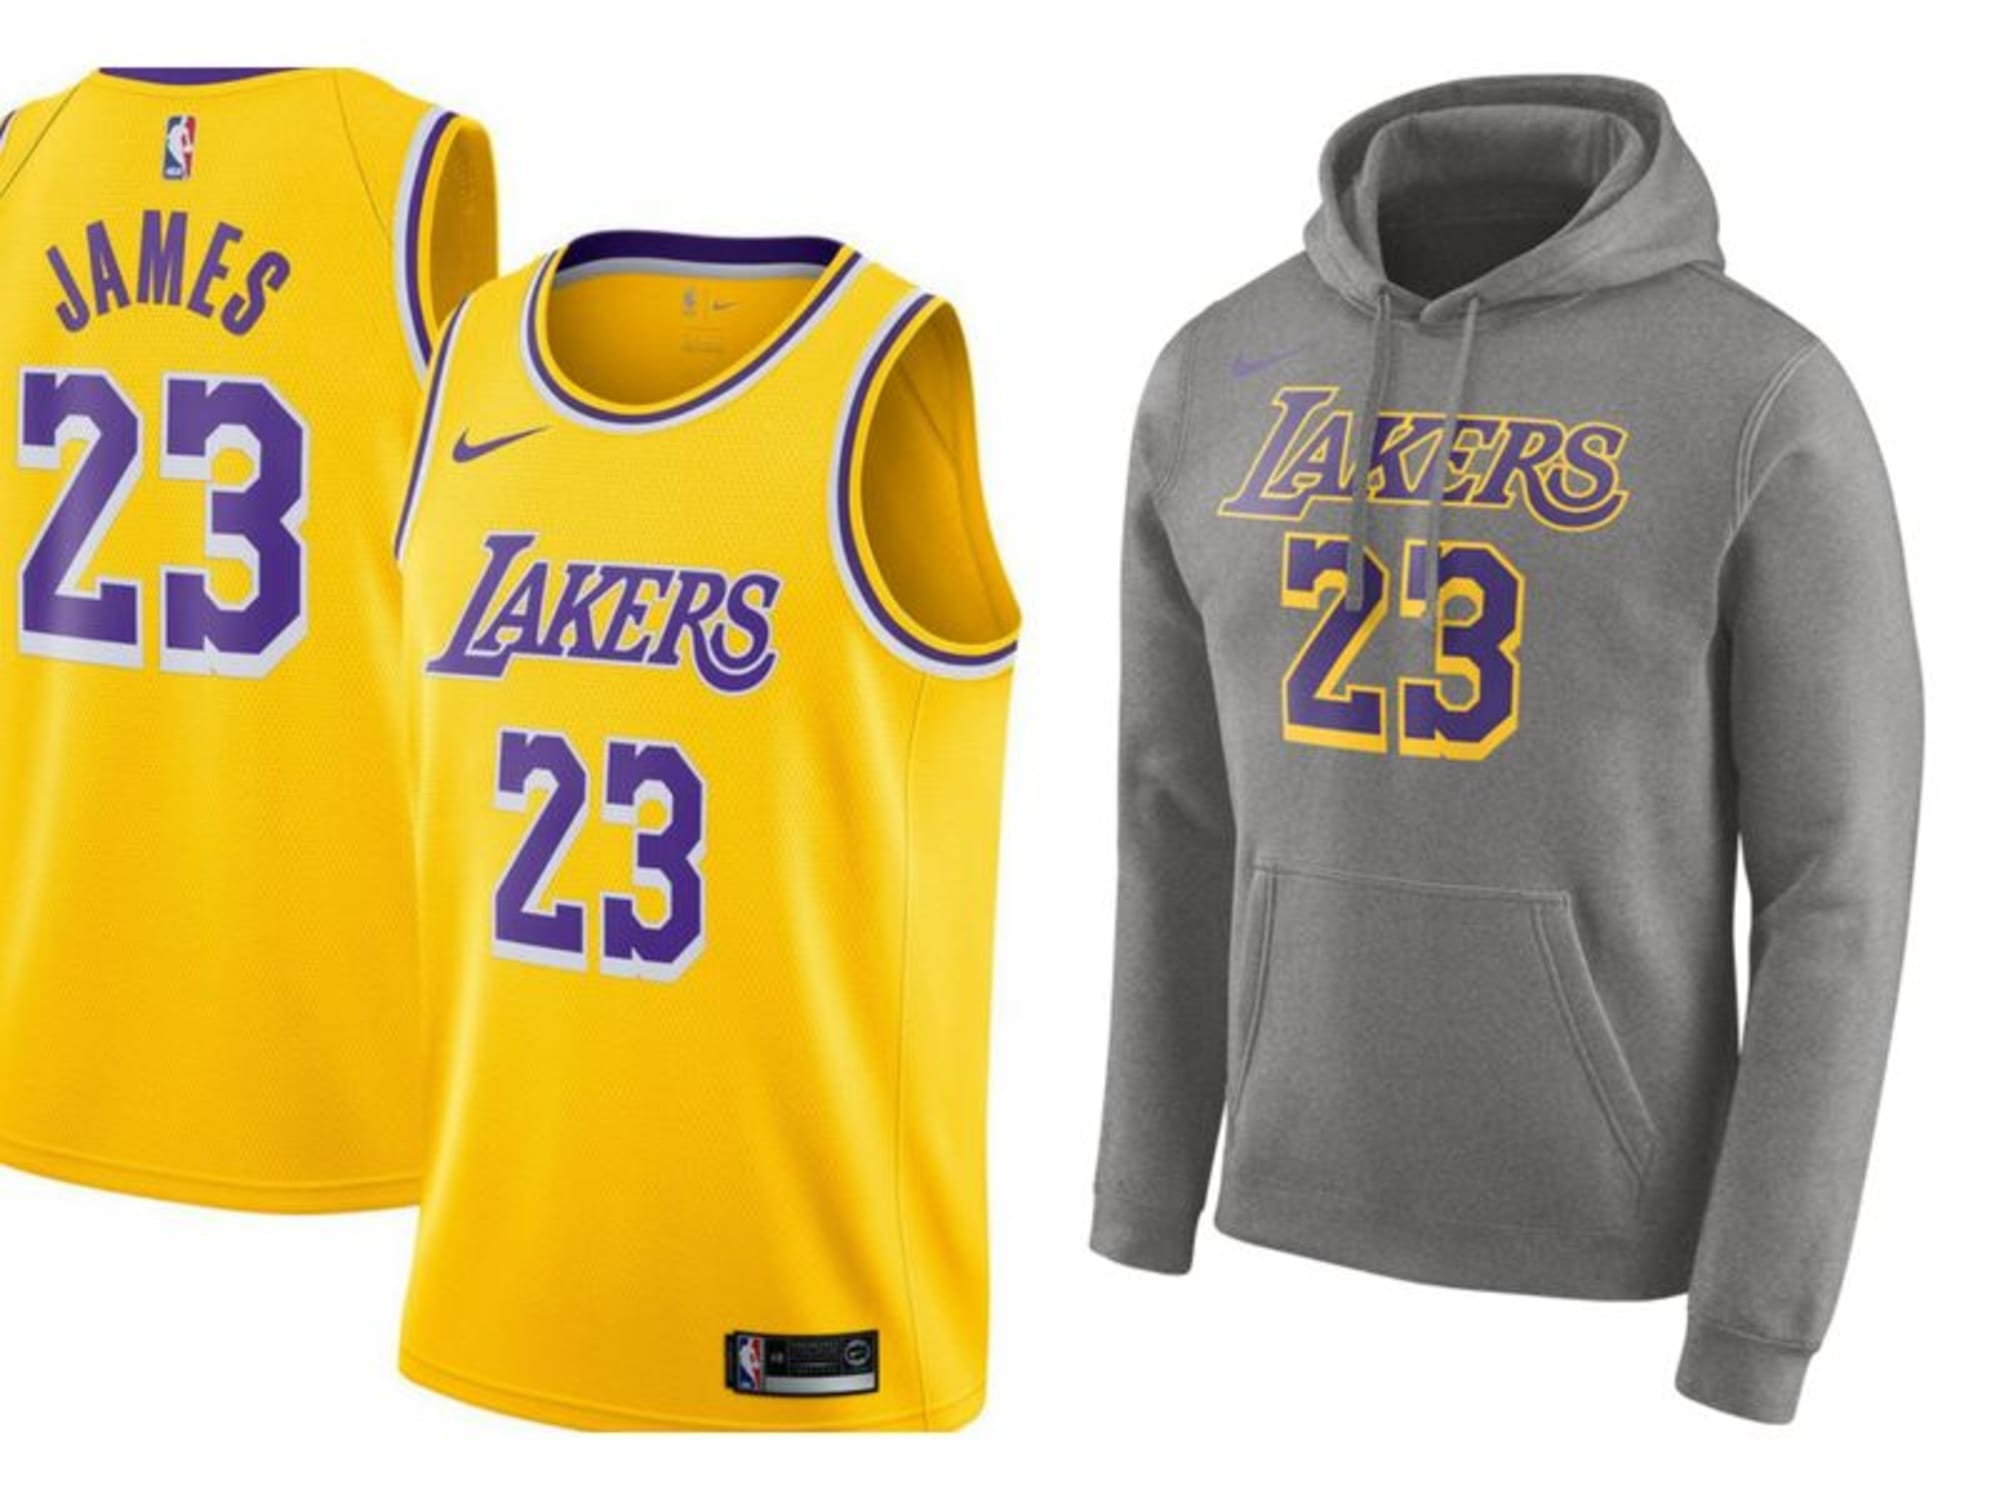 lakers 2018 jersey design